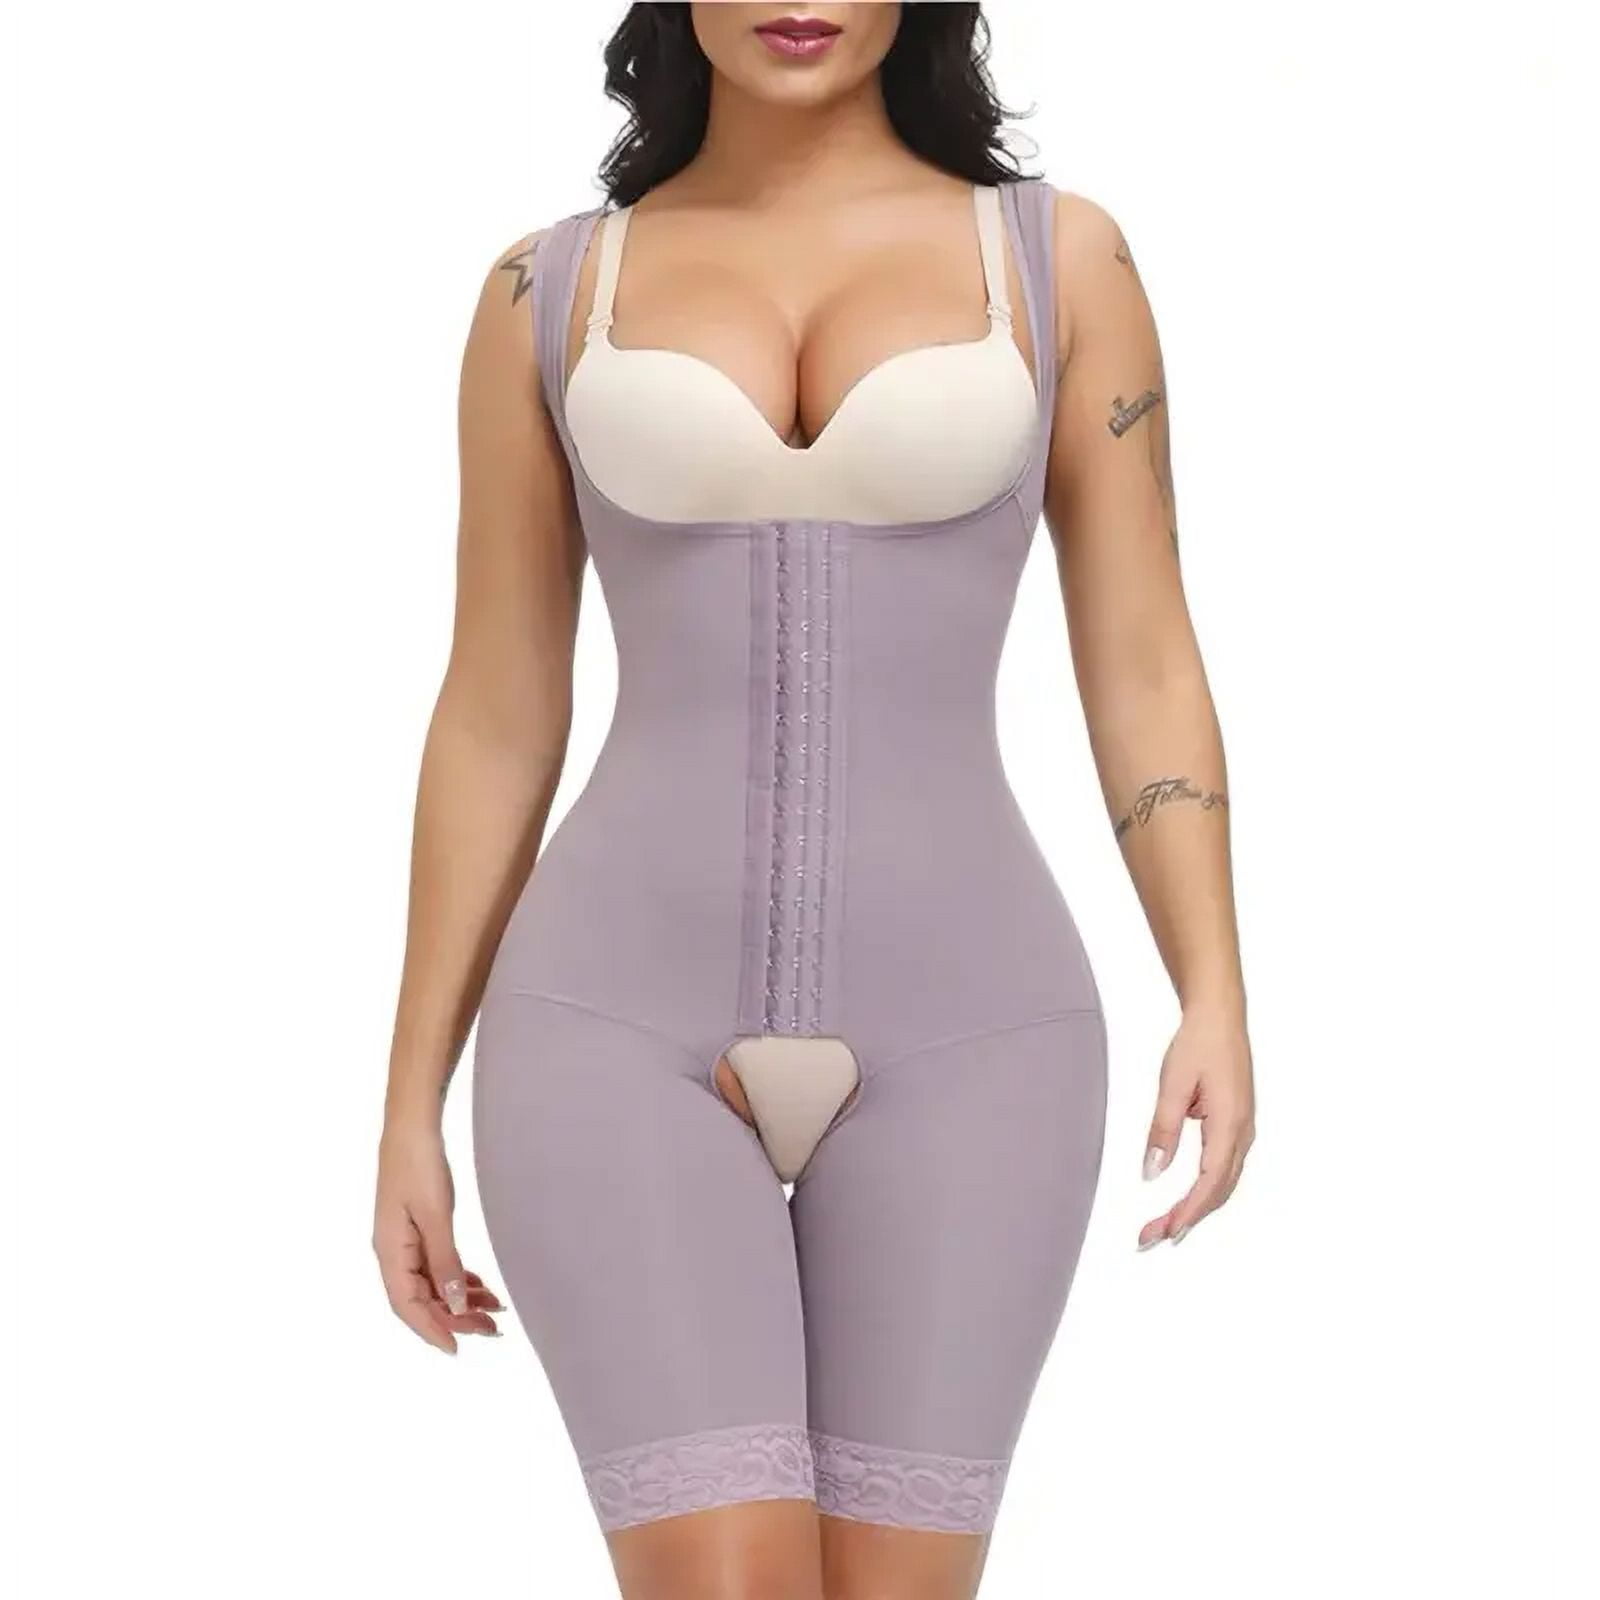 BBL Stage 2 Fajas Colombians Full Body Shapewear for Women Tummy Control  Post Surgery Garment Butt Lifter Bodysuit (Color : 1N5359B (24V), Size 